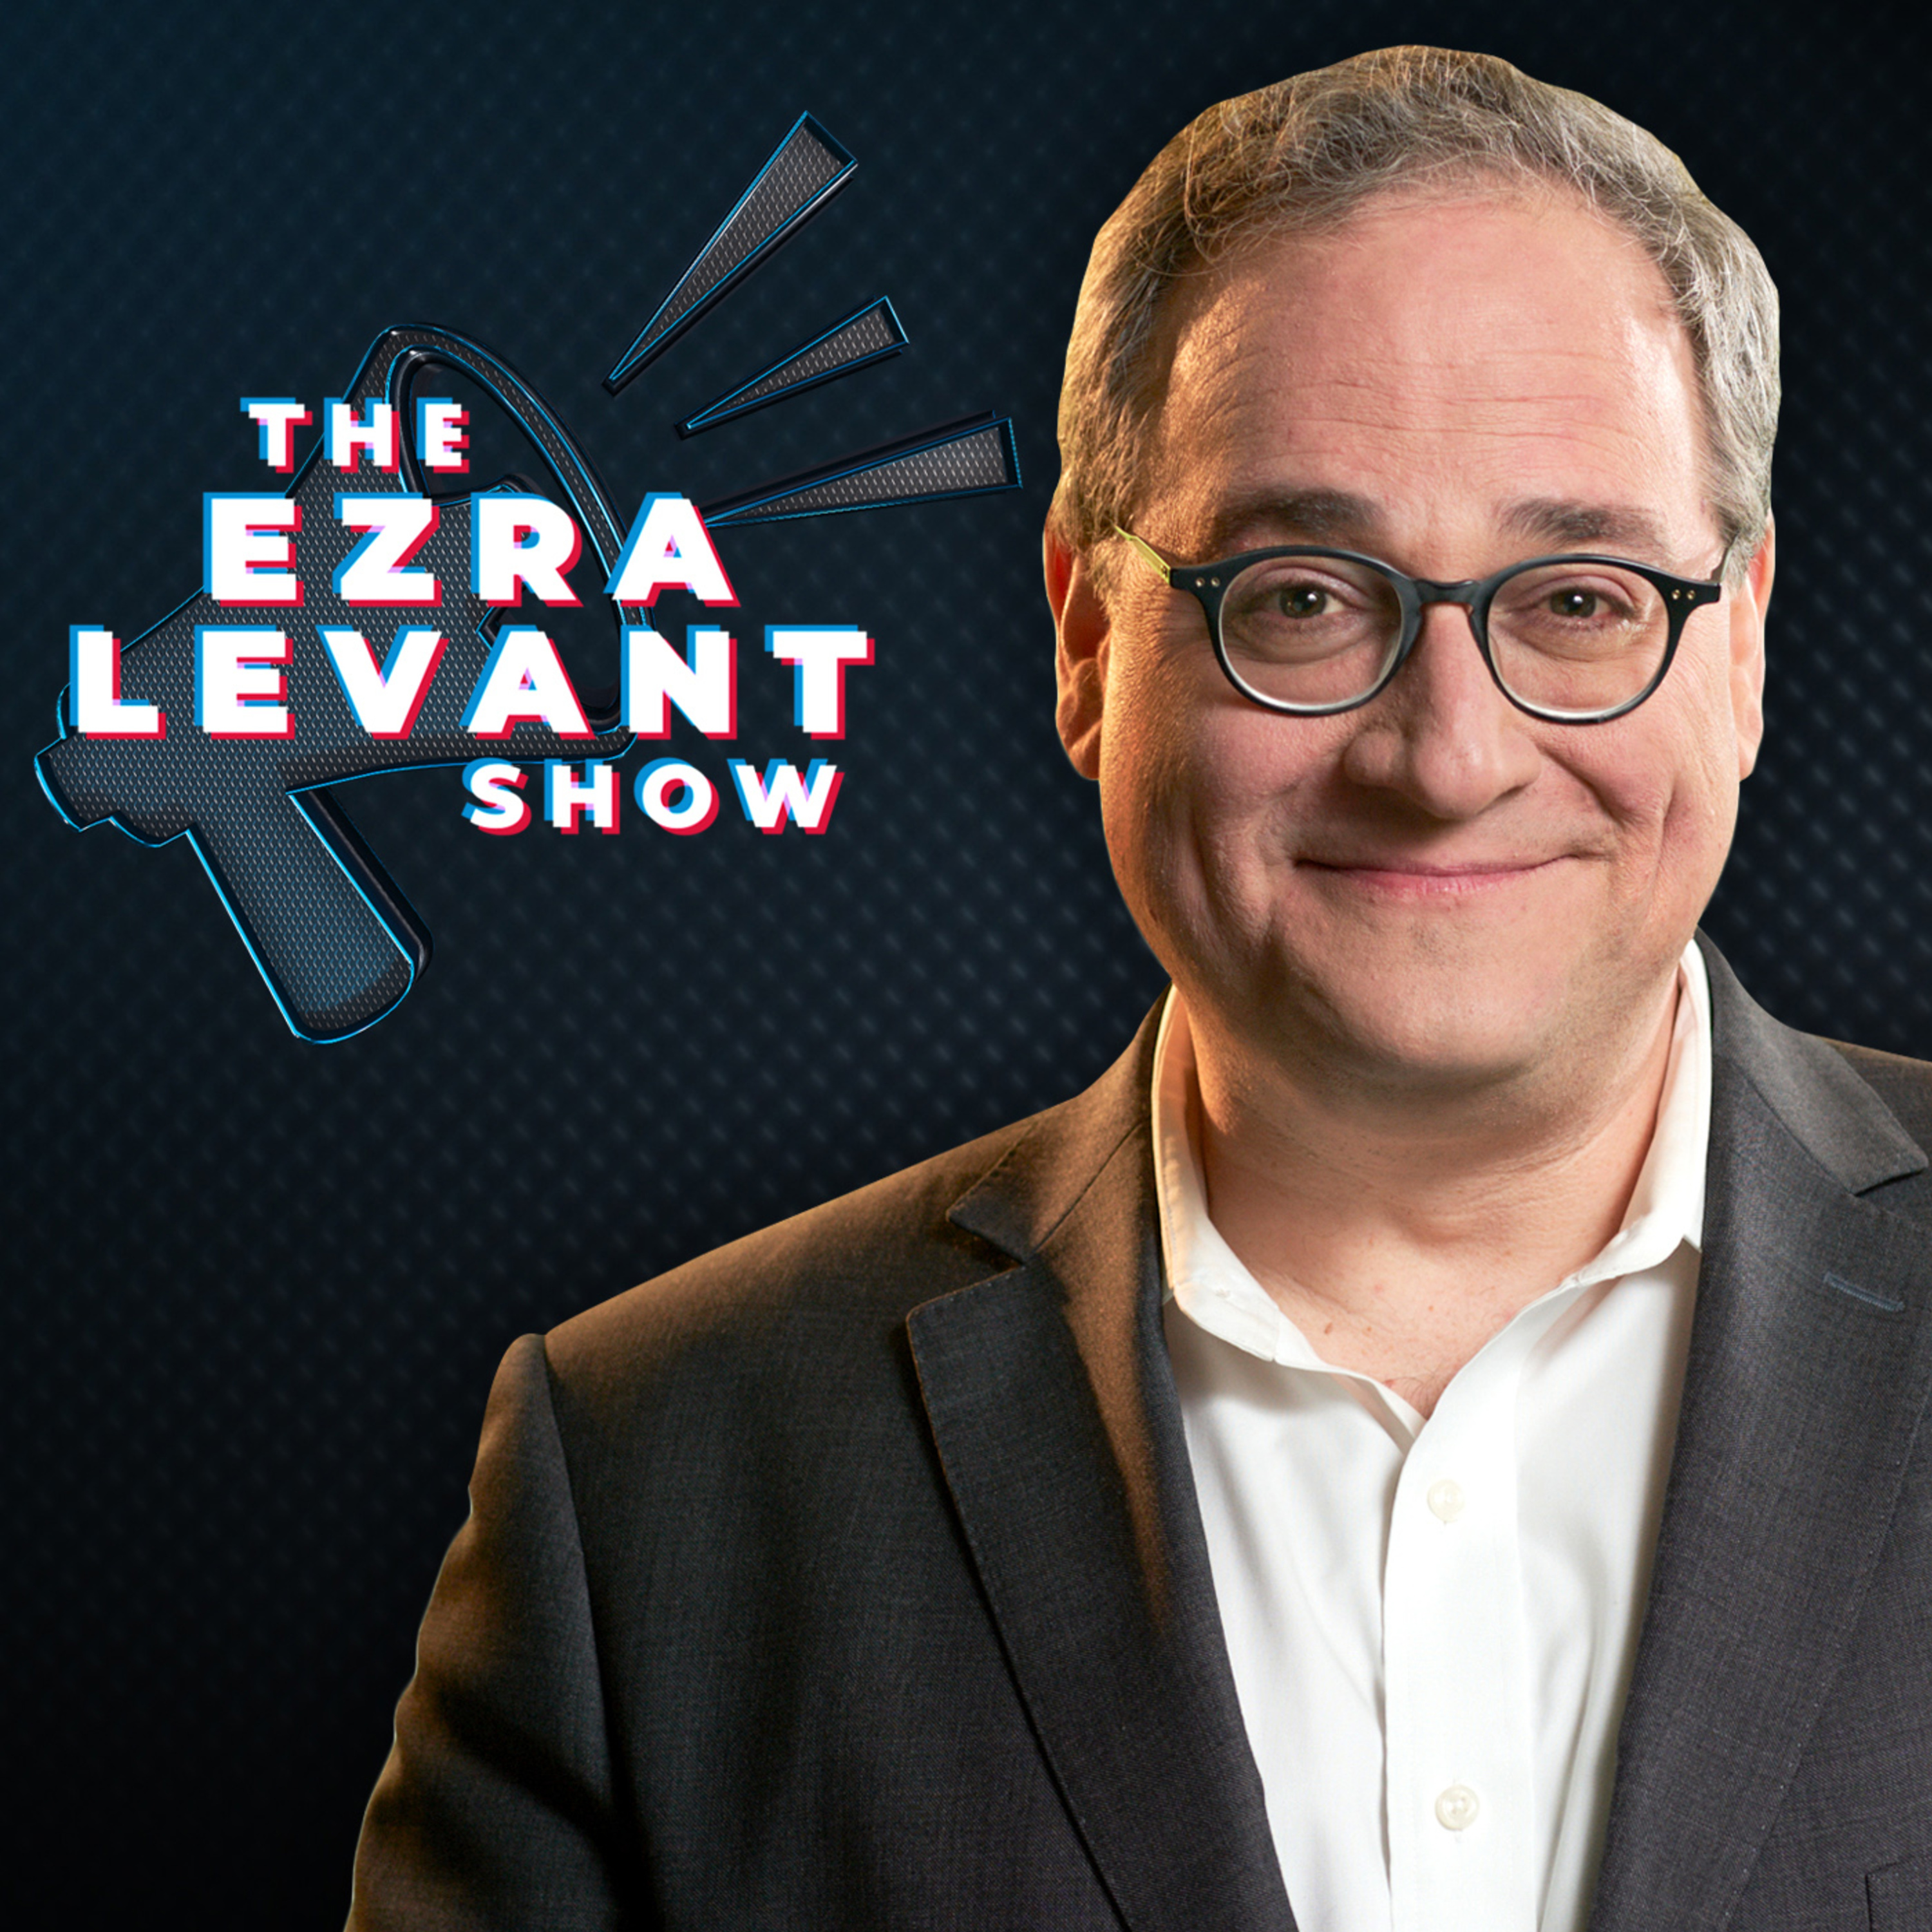 EZRA LEVANT: If a Pastor is arrested and the media doesn't cover it, did it even happen?